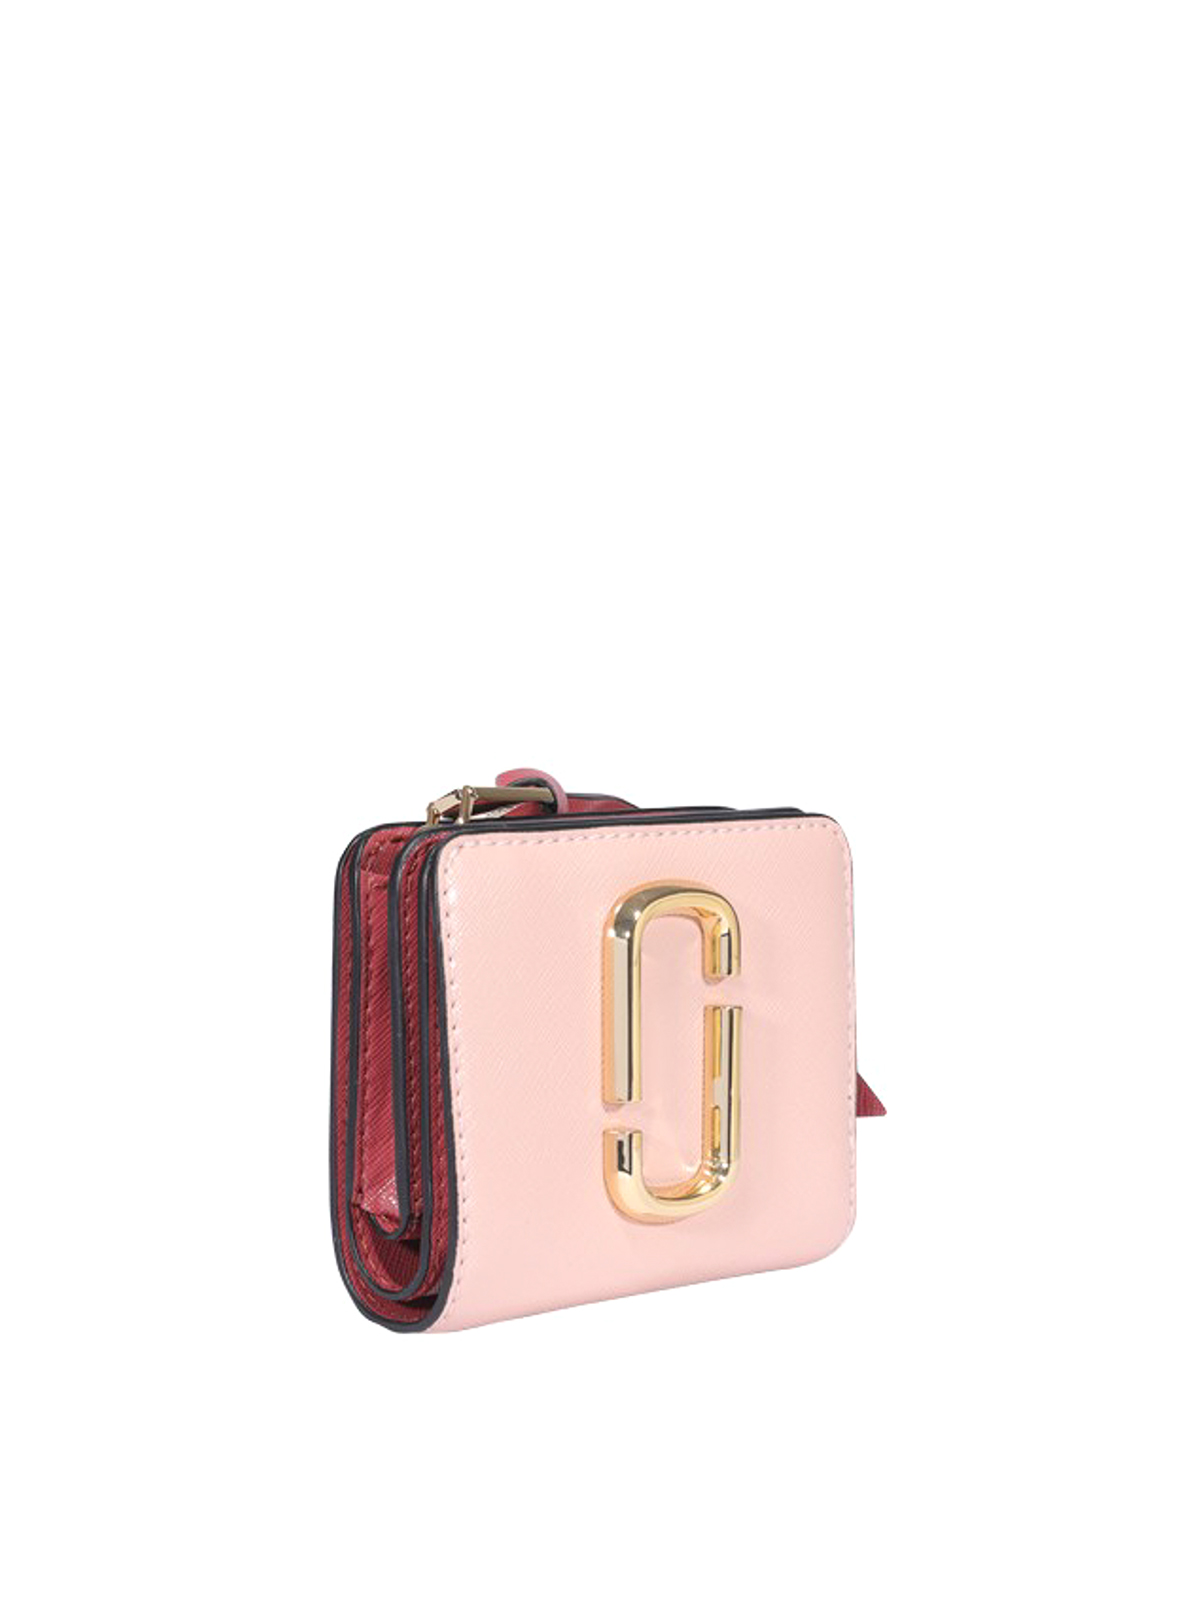 The snapshot mini compact leather wallet by Marc Jacobs